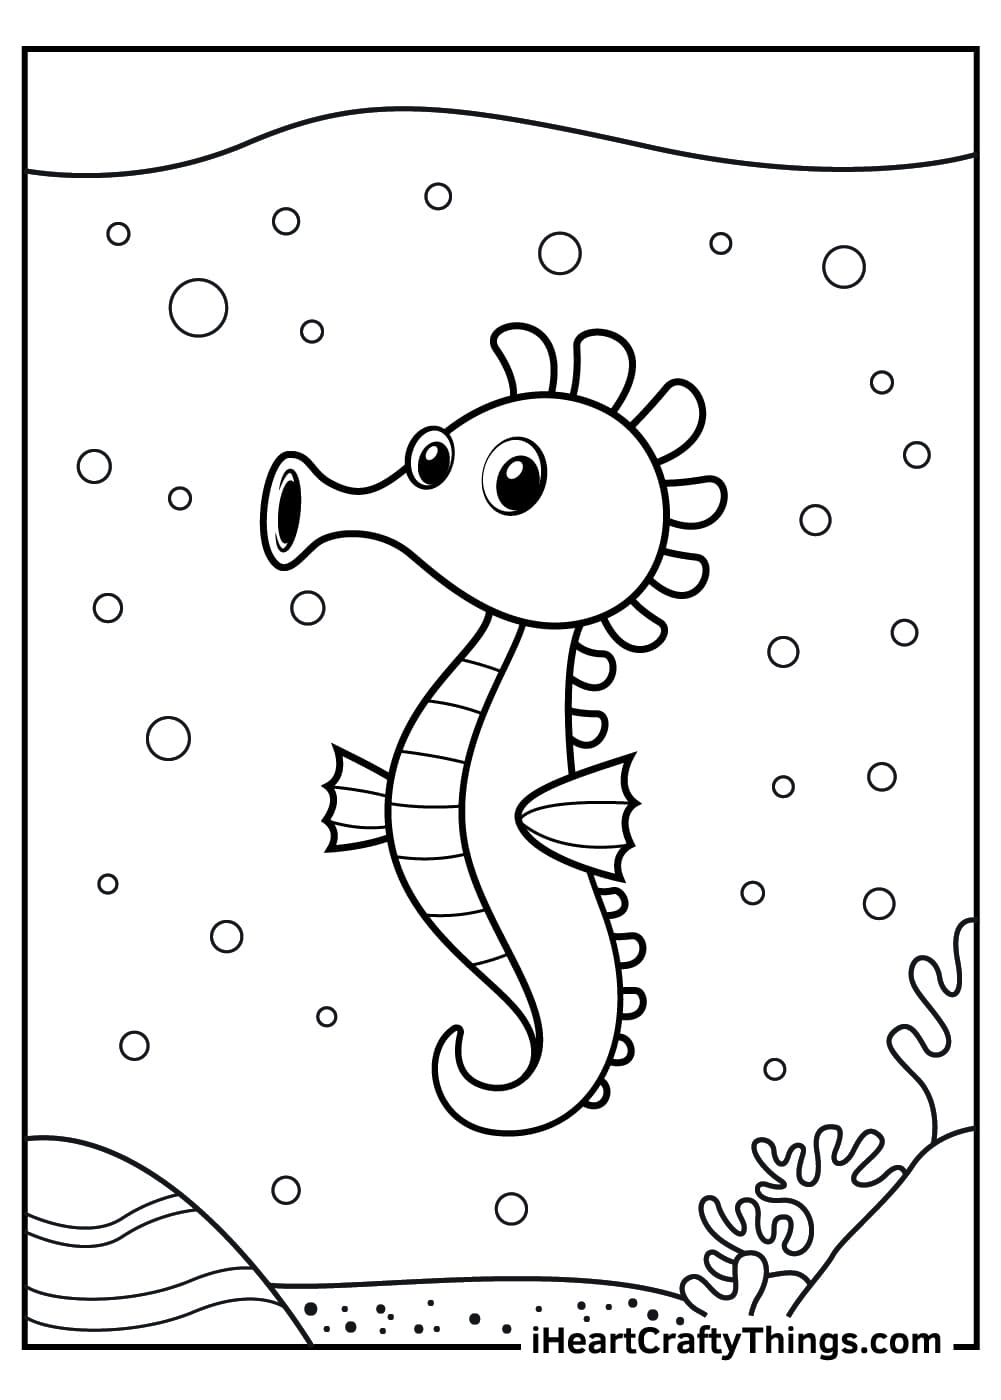 Seahorse For Kids Image